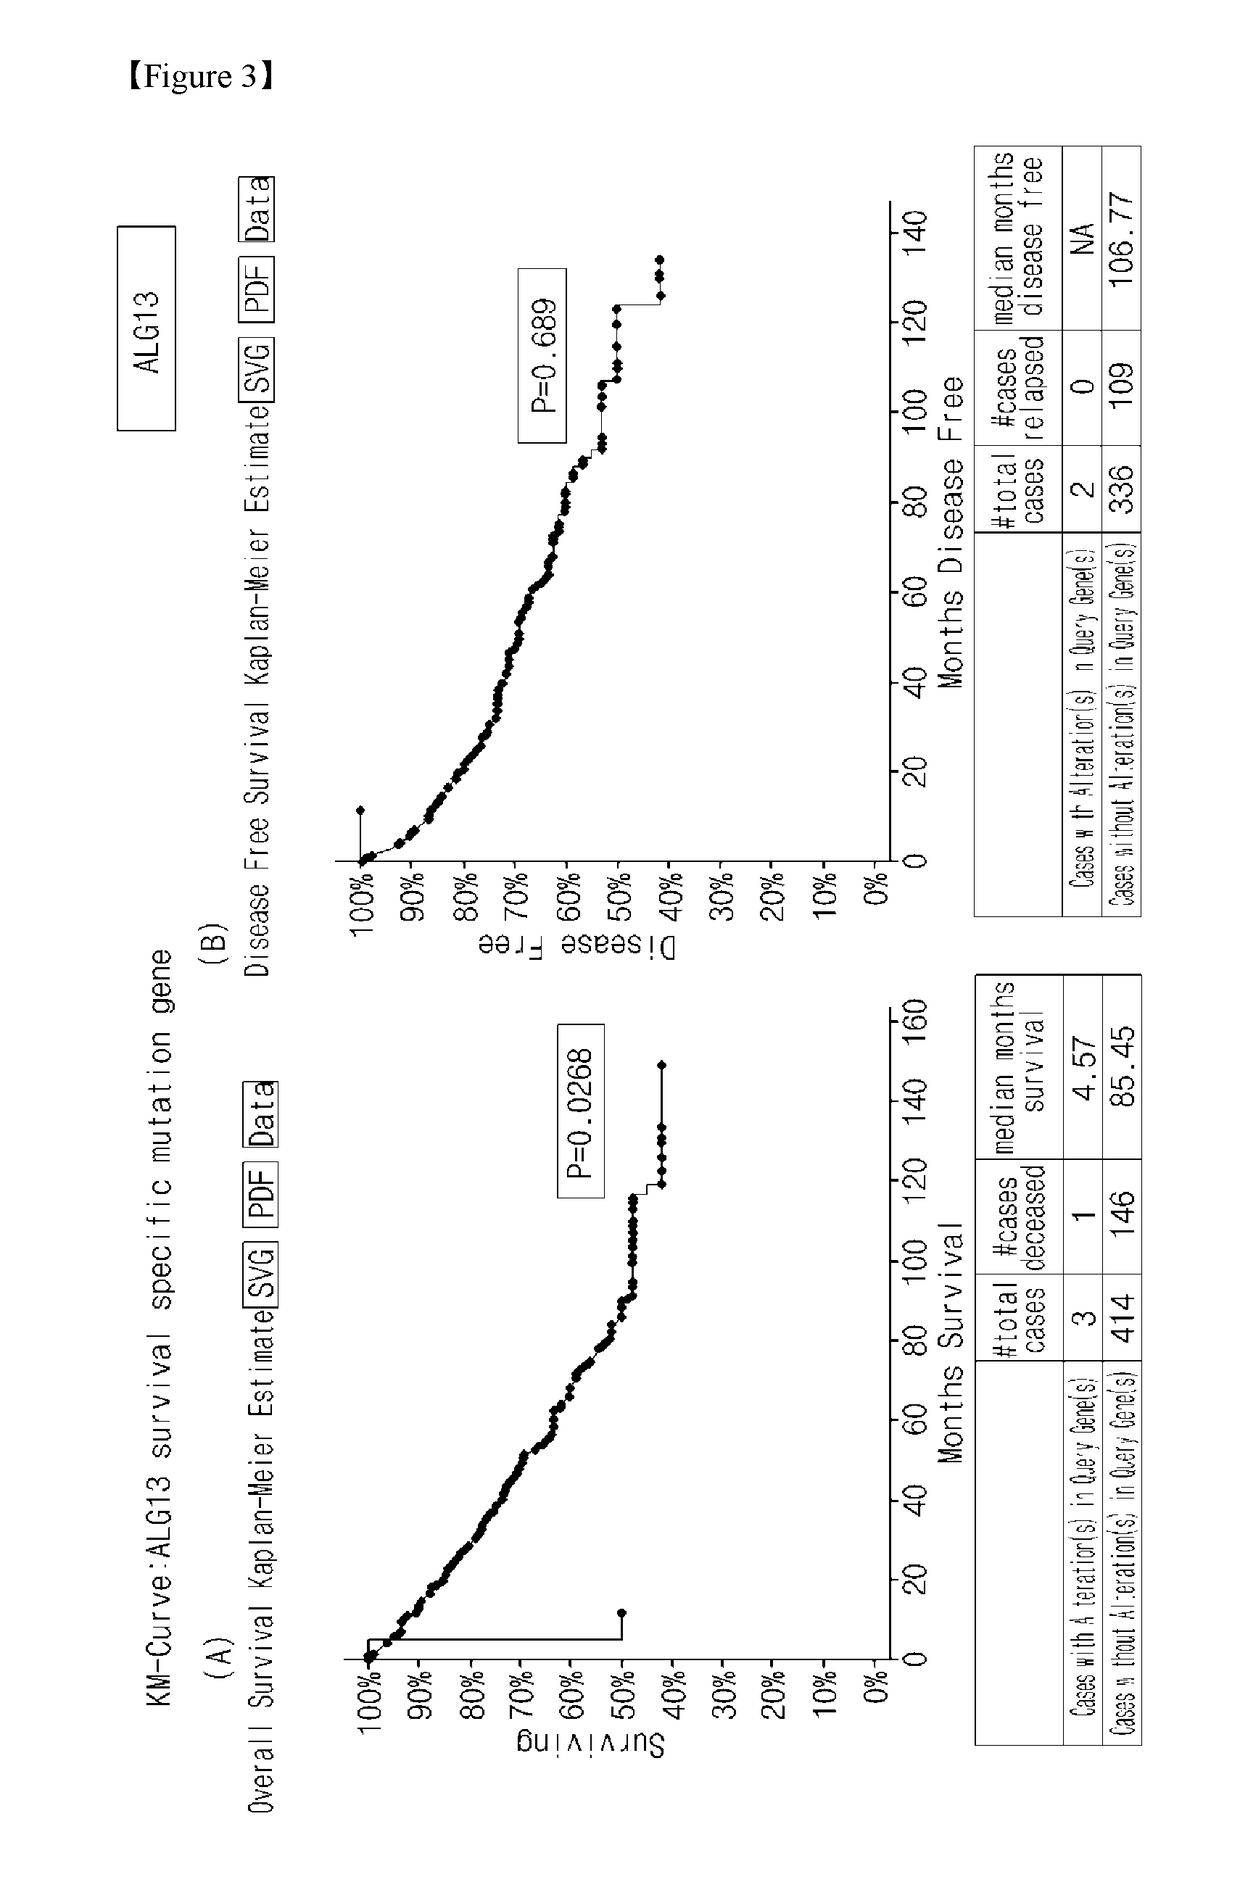 Gender-specific markers for diagnosing prognosis and determining treatment strategy for renal cancer patients